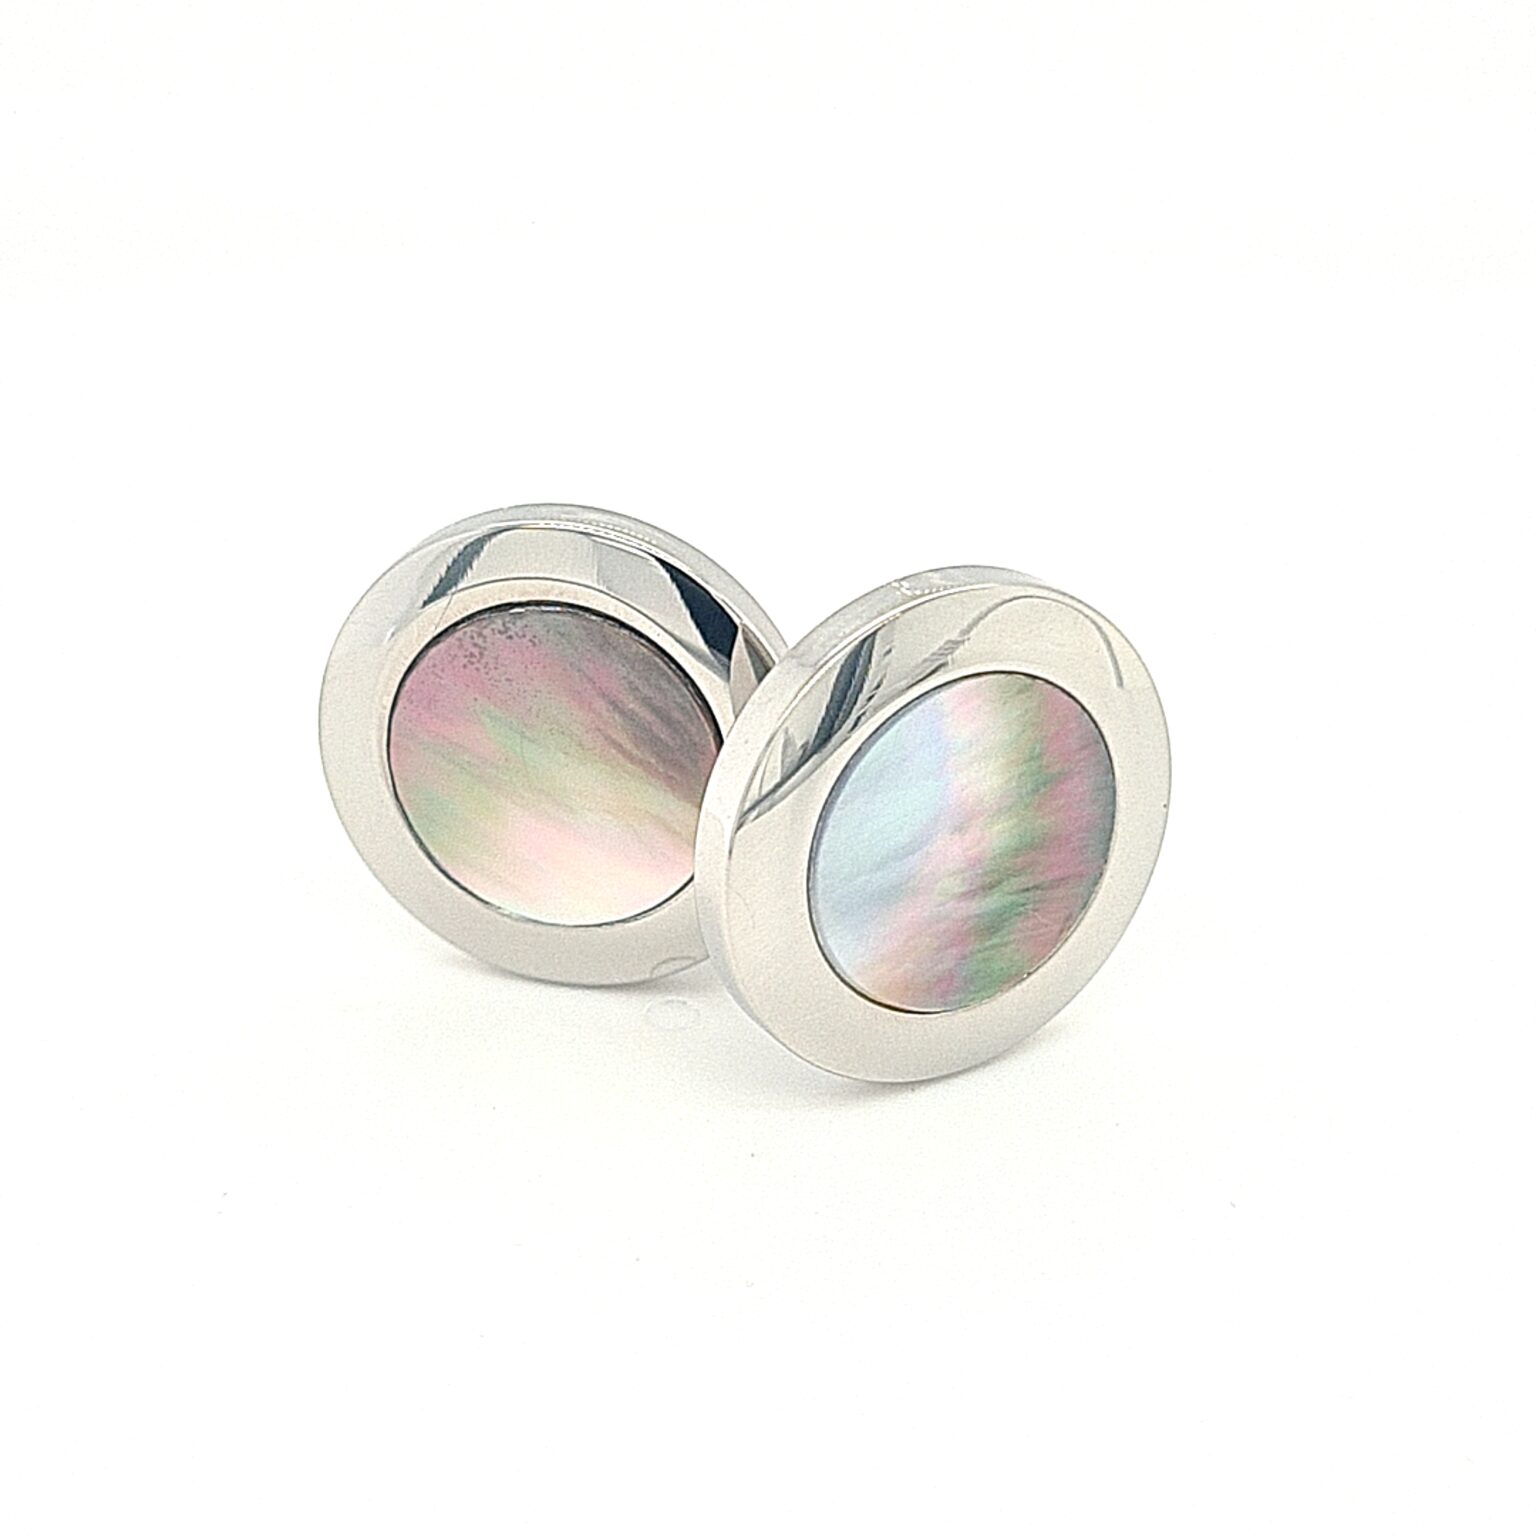 Leon Bakers Stainless Steel and Black Mother of Pearl Cufflinks_3